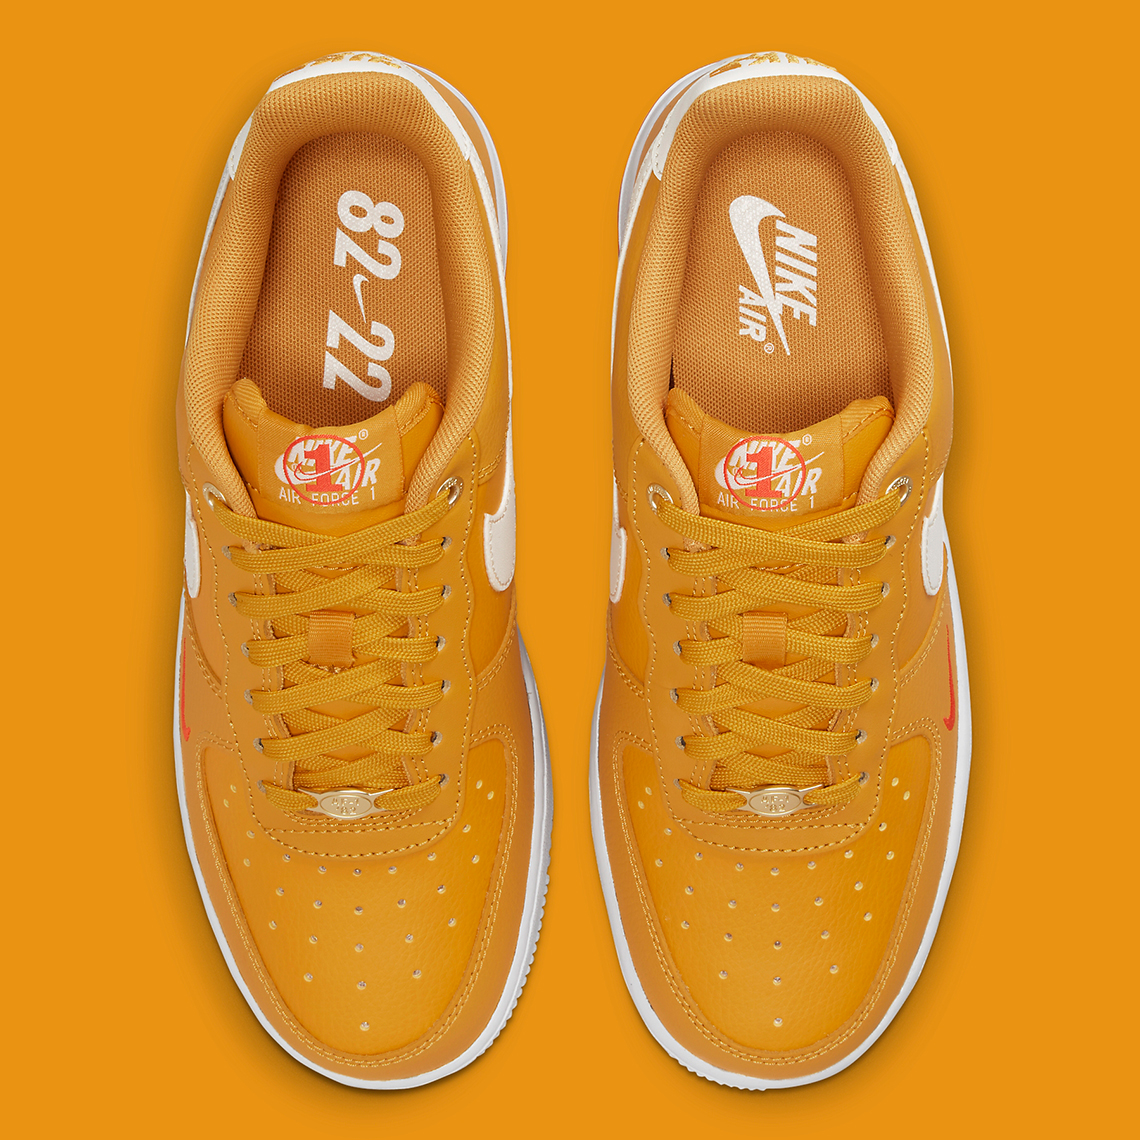 The Nike Air Force 1 Low 40th Anniversary Yellow Ochre Celebrates In Style  - Sneaker News